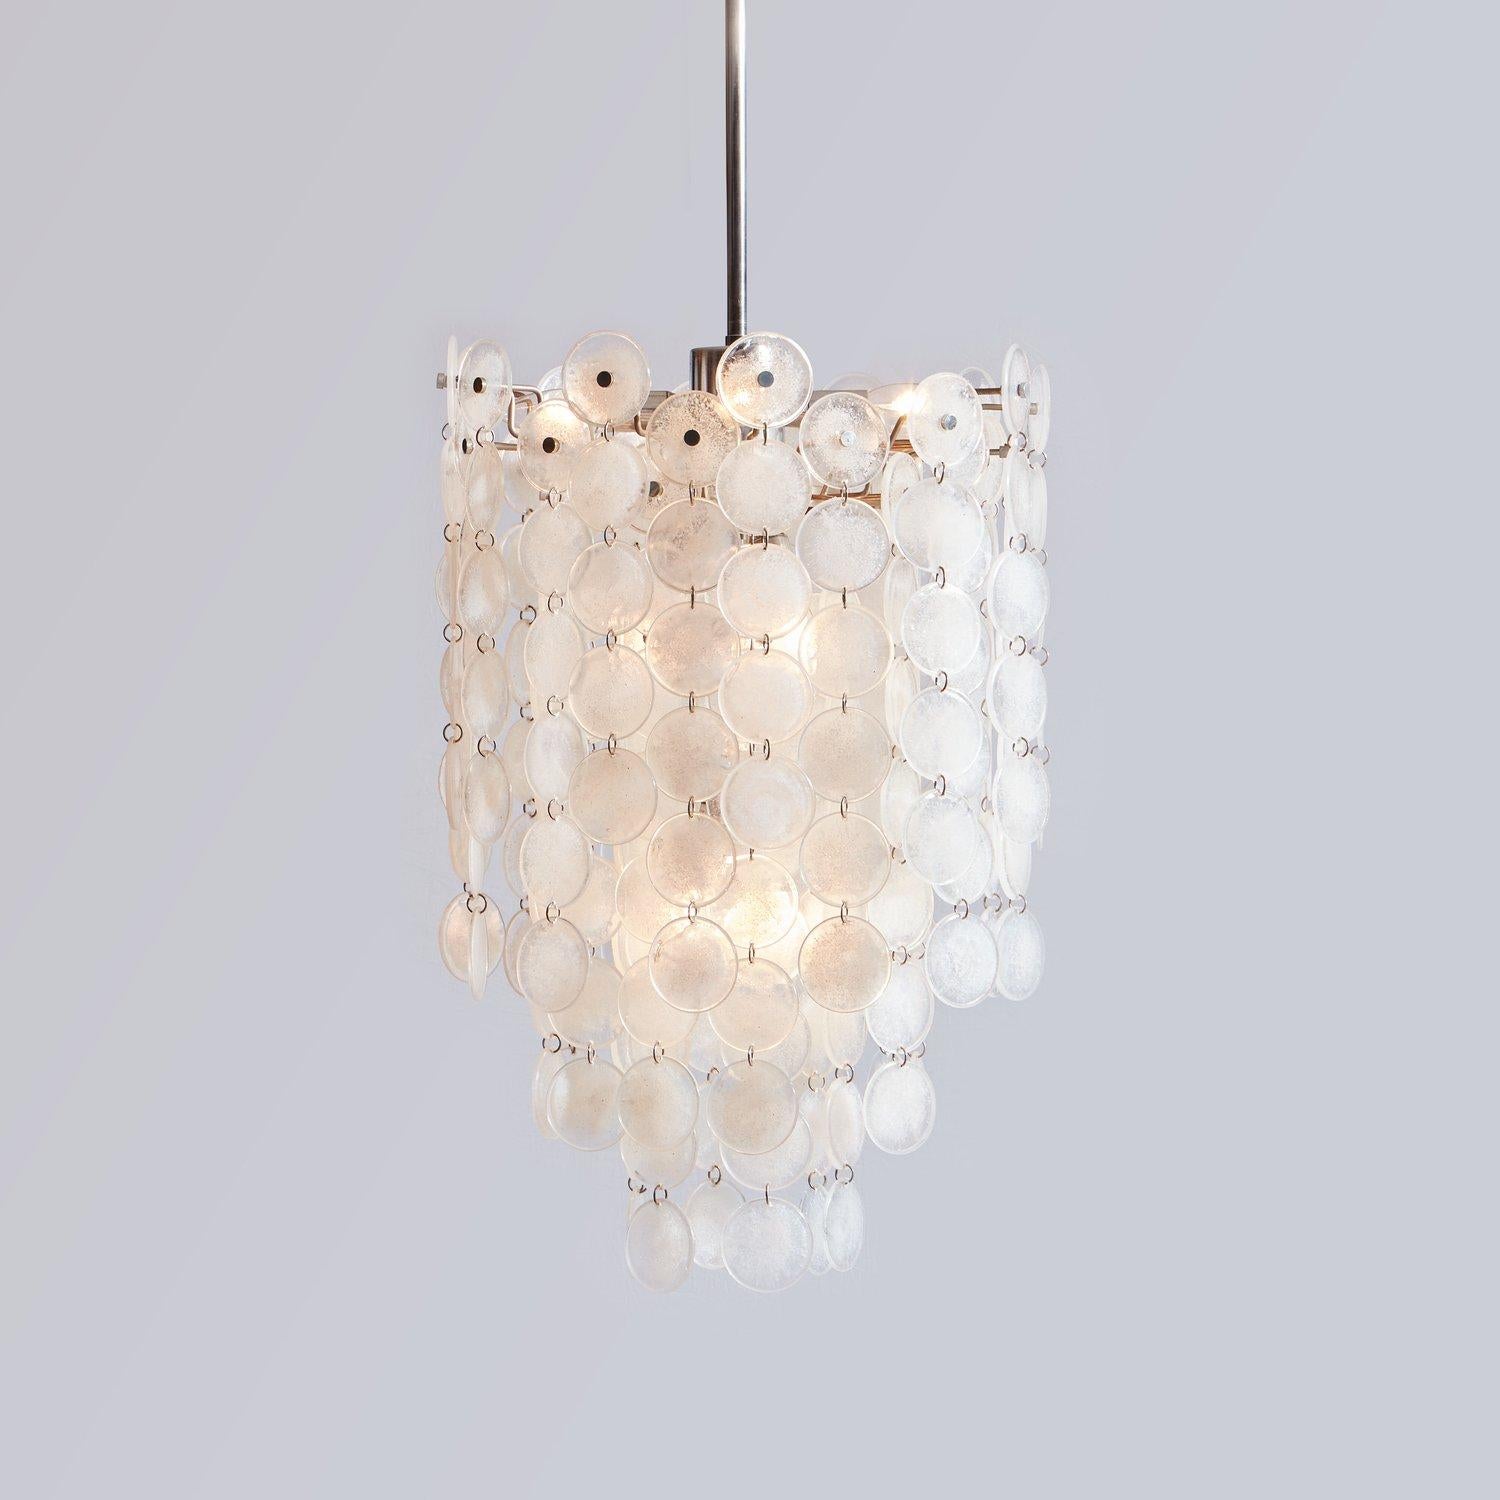 A “Thousand Moons” chandelier designed by Carlo Nason for Mazzega in the 1960s. This chandelier features 178 clear and white hand blown Murano glass discs held together with small chrome rings. It has a chrome frame, rod and canopy with ornamental